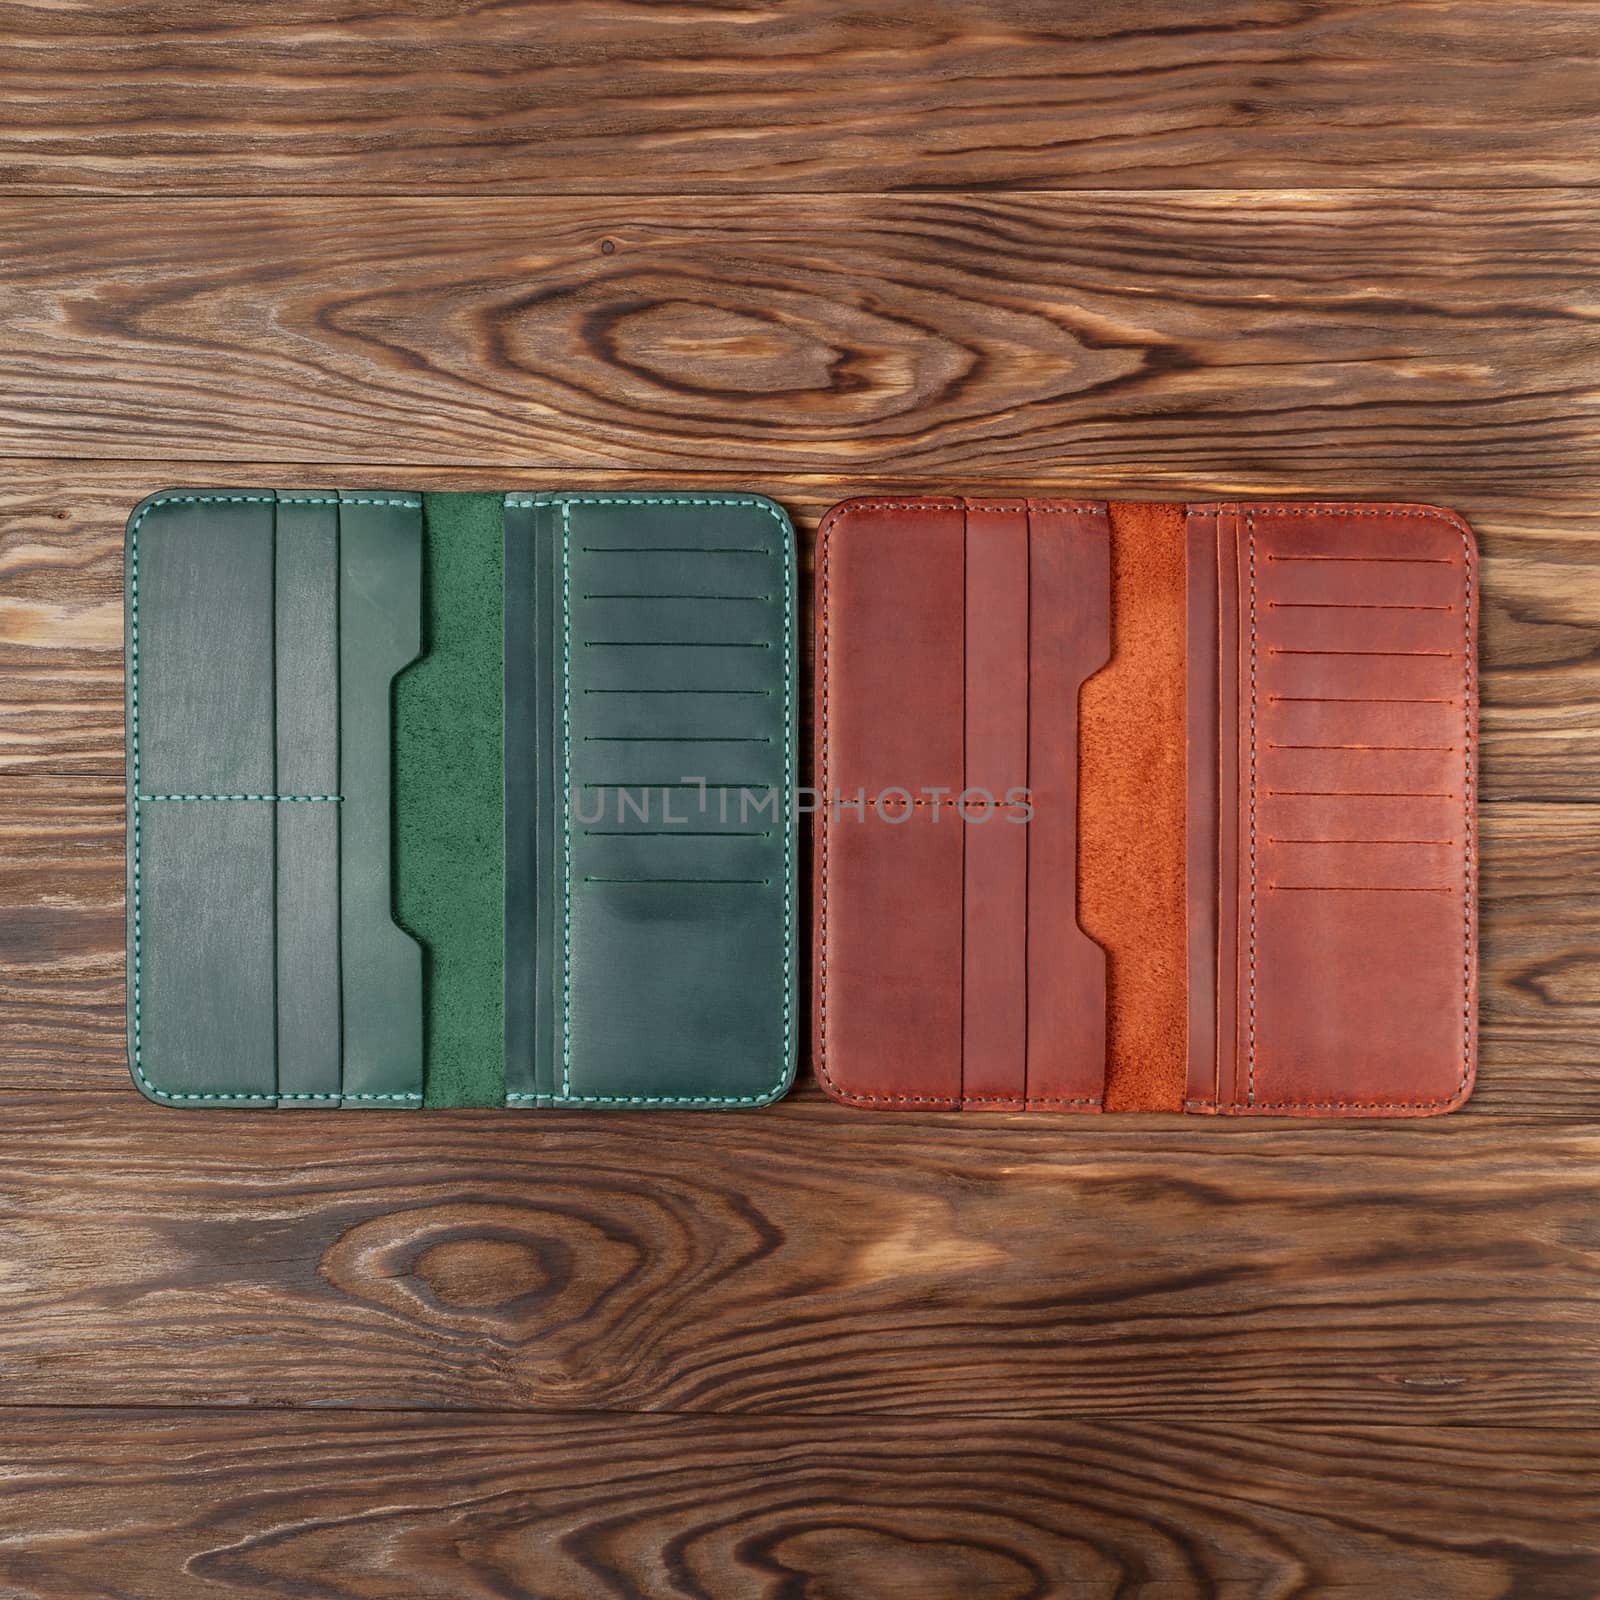 Two  handmade leather  opened porte-monnaie on wooden textured background. Up to down view. Stock photo of luxury accessories.